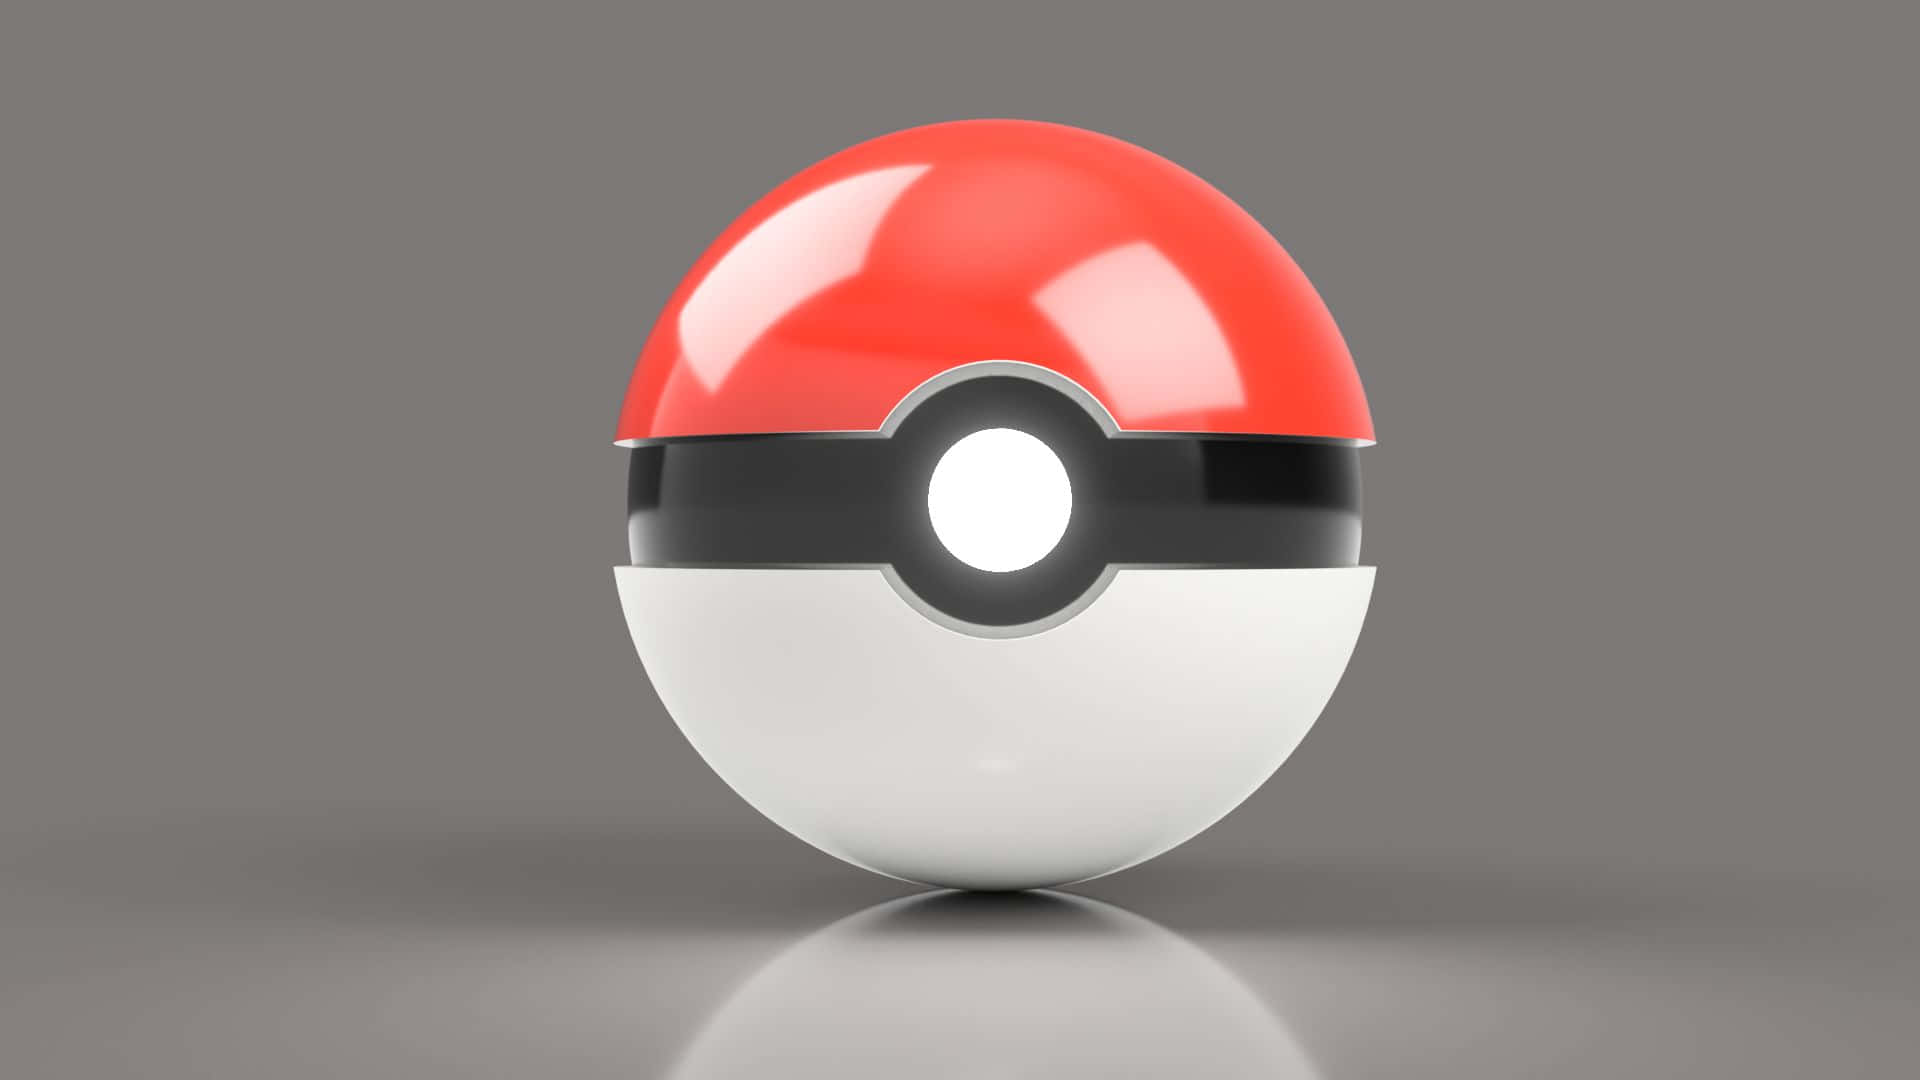 200+] Pokeball Pictures